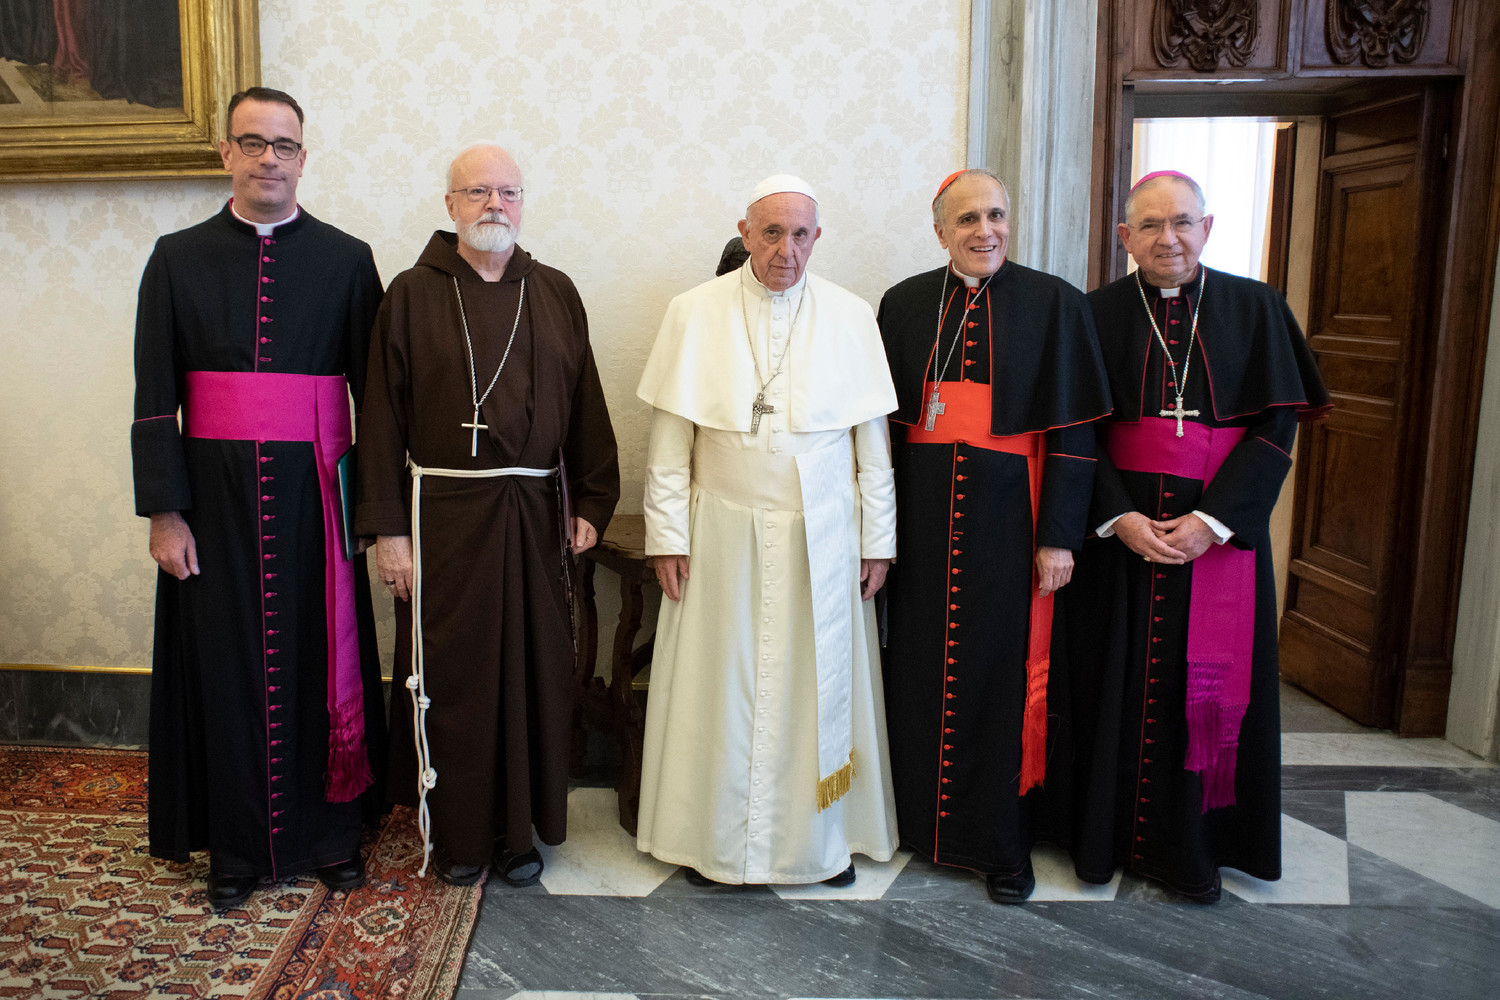 Pope Francis poses with officials representing the U.S. Conference of Catholic Bishops during a meeting at the Vatican Sept. 13. Pictured from left are Msgr. J. Brian Bransfield, general secretary of the conference, Cardinal Sean P. O’Malley of Boston, president of the Pontifical Commission for the Protection of Minors, Cardinal Daniel N. DiNardo of Galveston-Houston, president of the conference, and Archbishop Jose H. Gomez of Los Angeles, vice president of the conference.